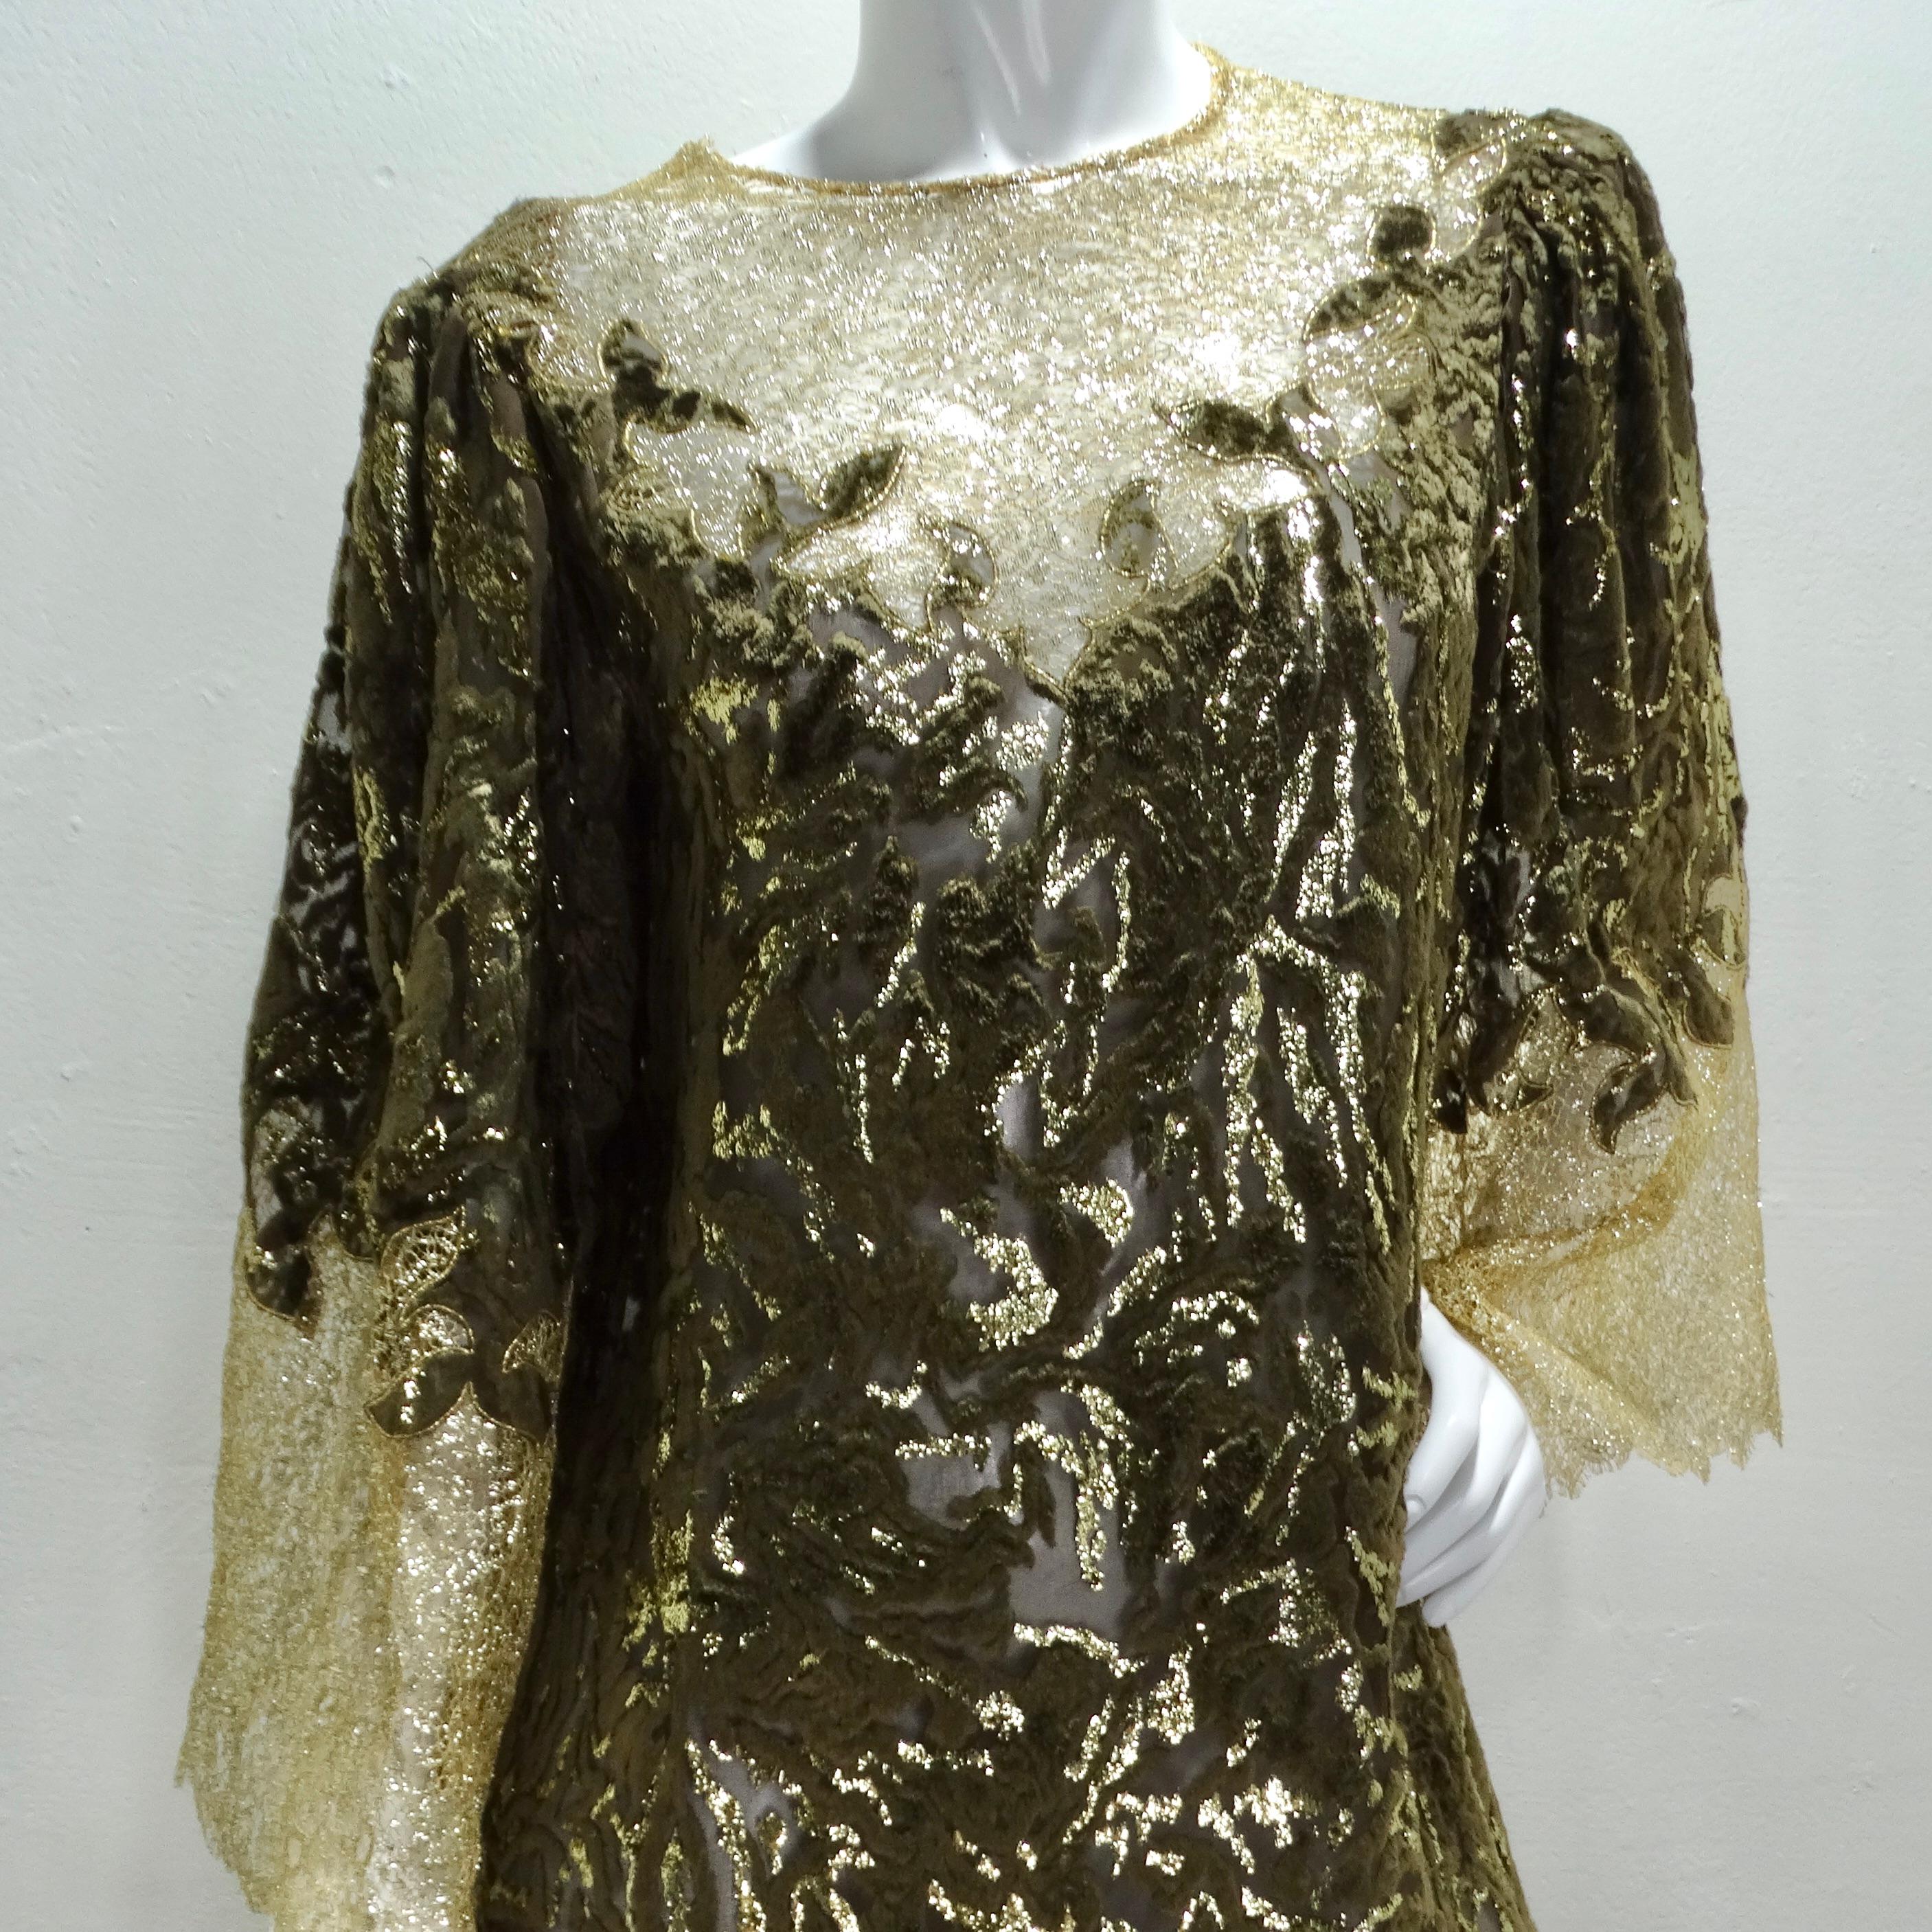 1980s Metallic Gold Velvet Lace Dress In Excellent Condition For Sale In Scottsdale, AZ